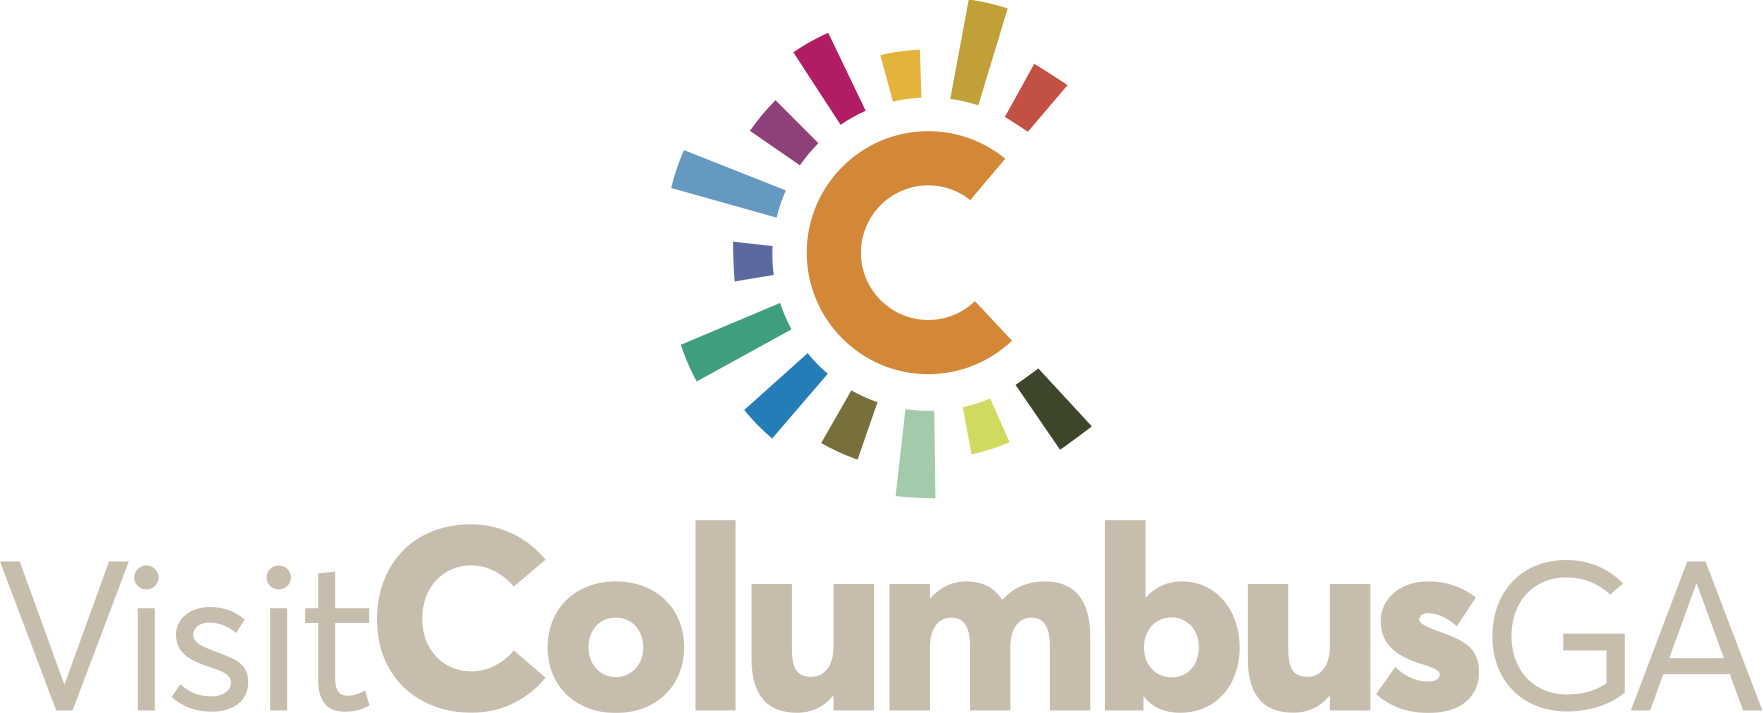 VisitColumbus-Stacked-CMYK-coated.png